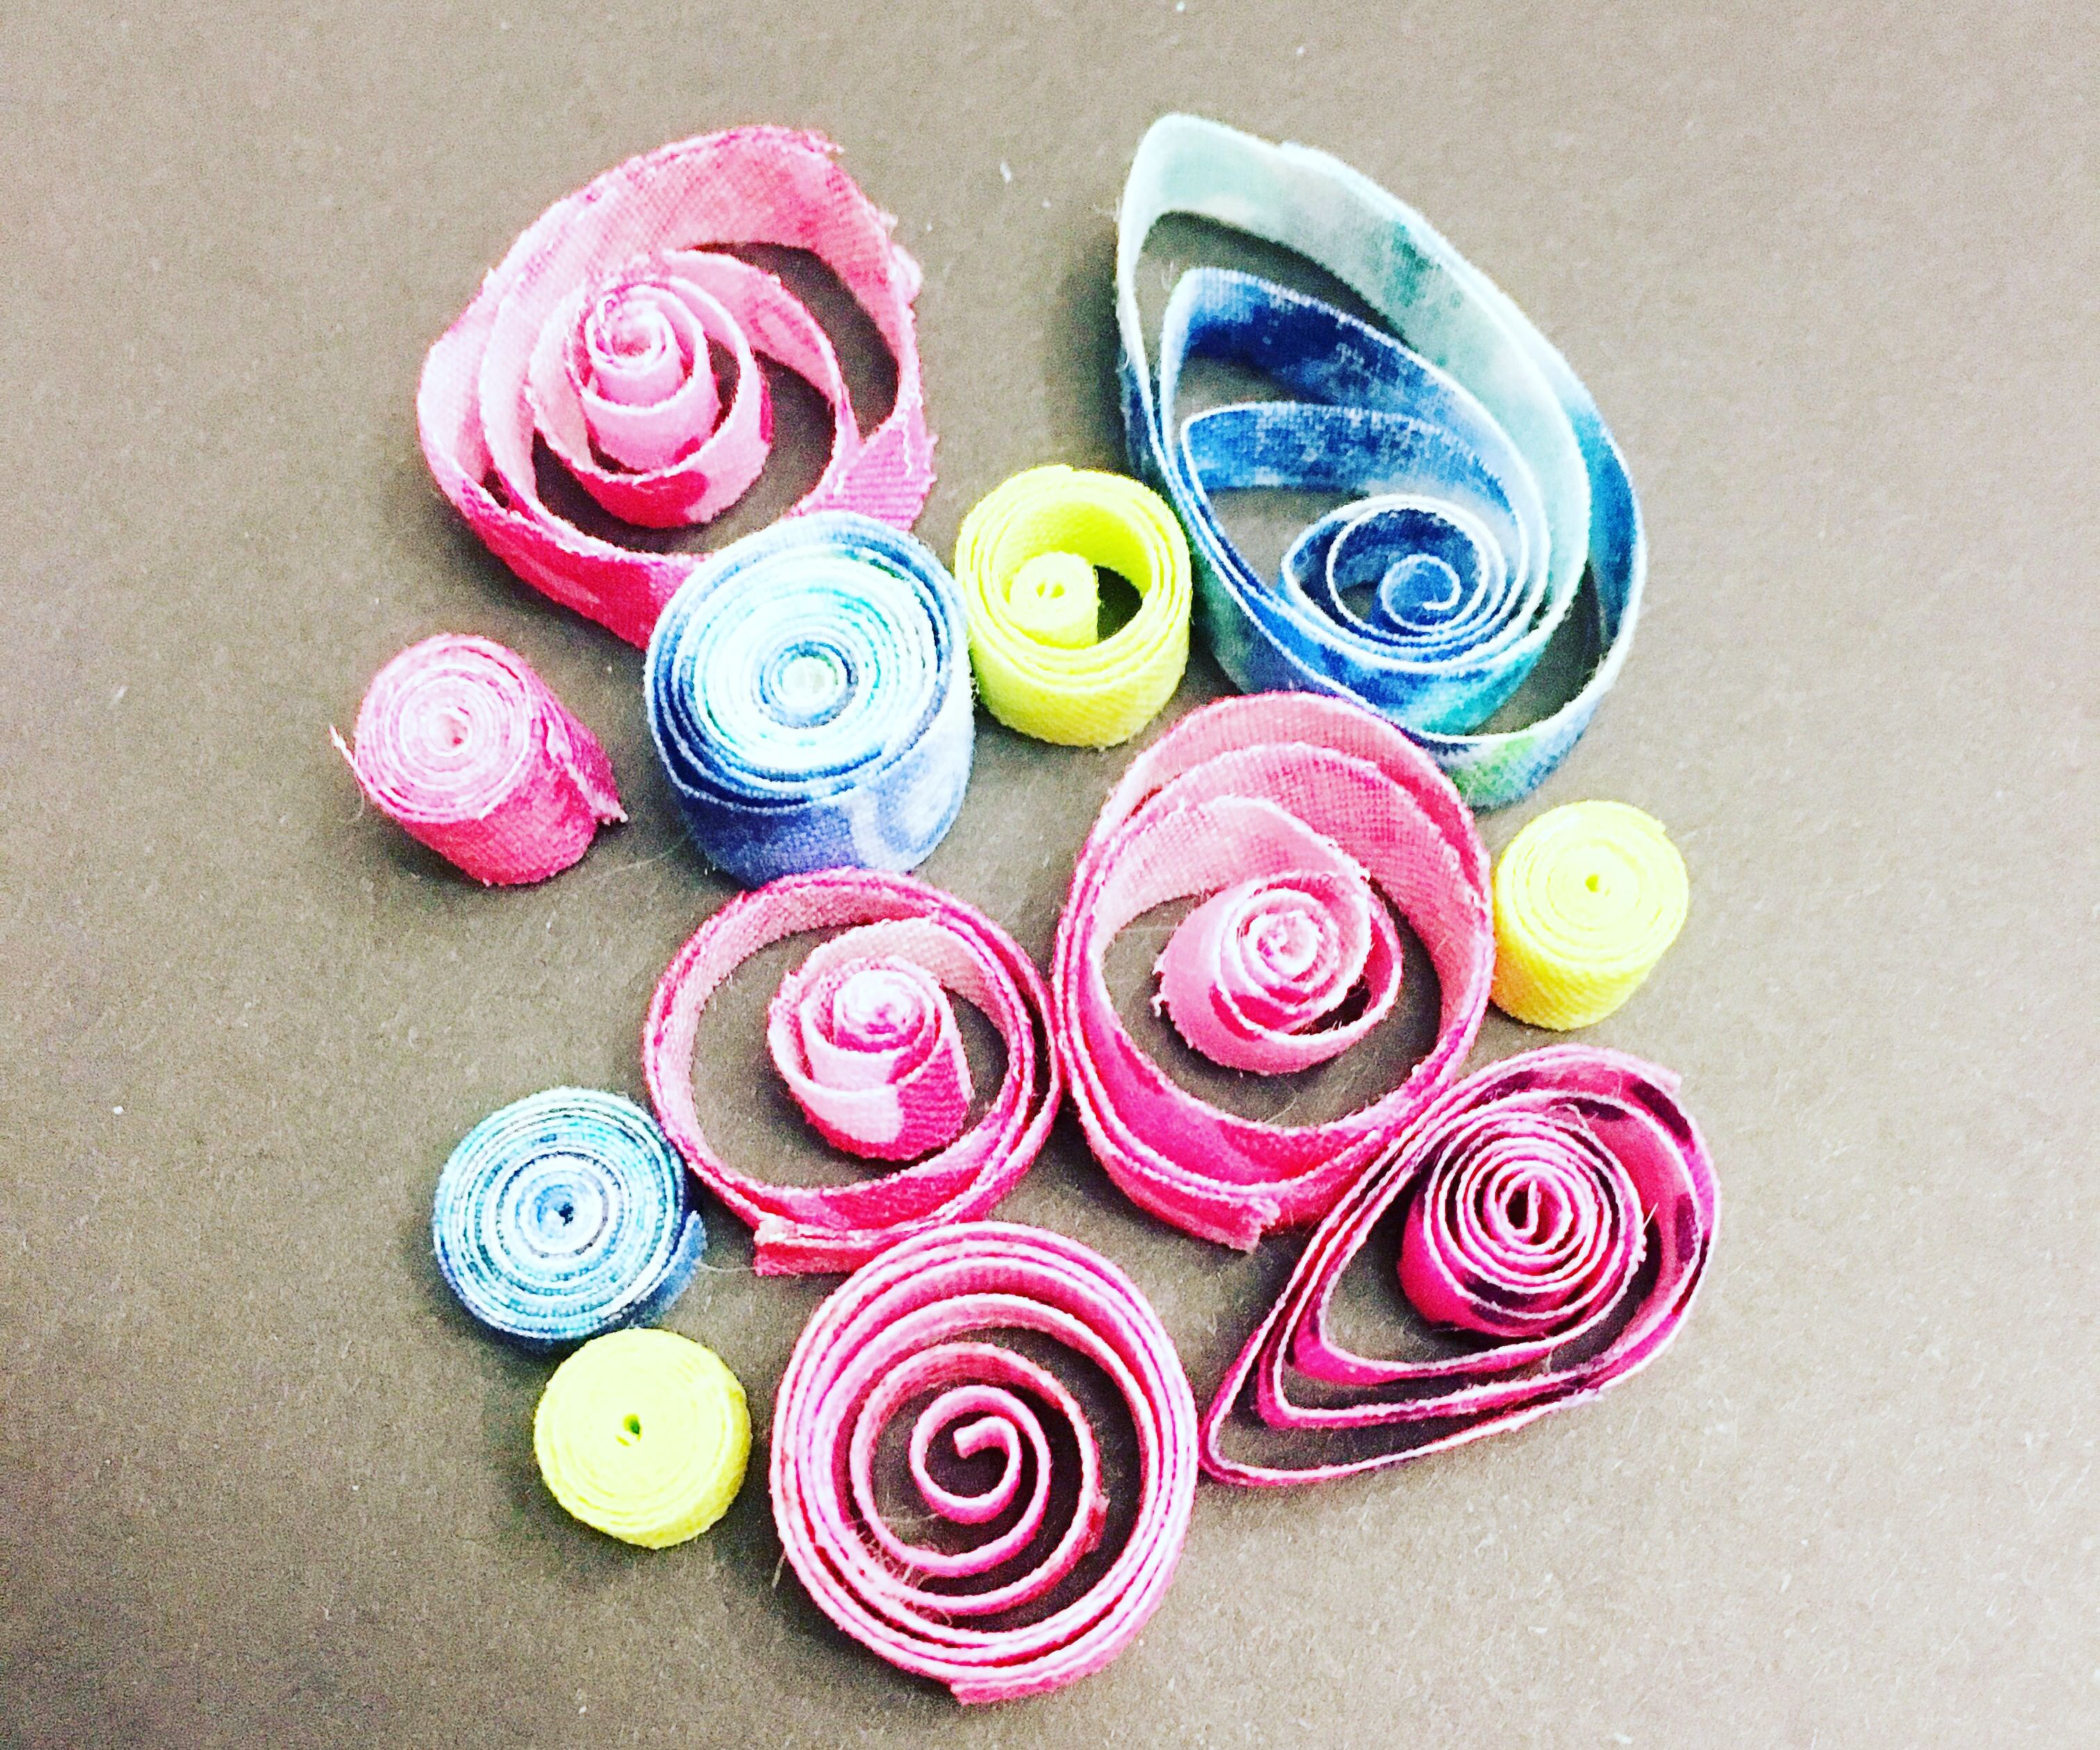 Hands rolling quilling paper into different shapes